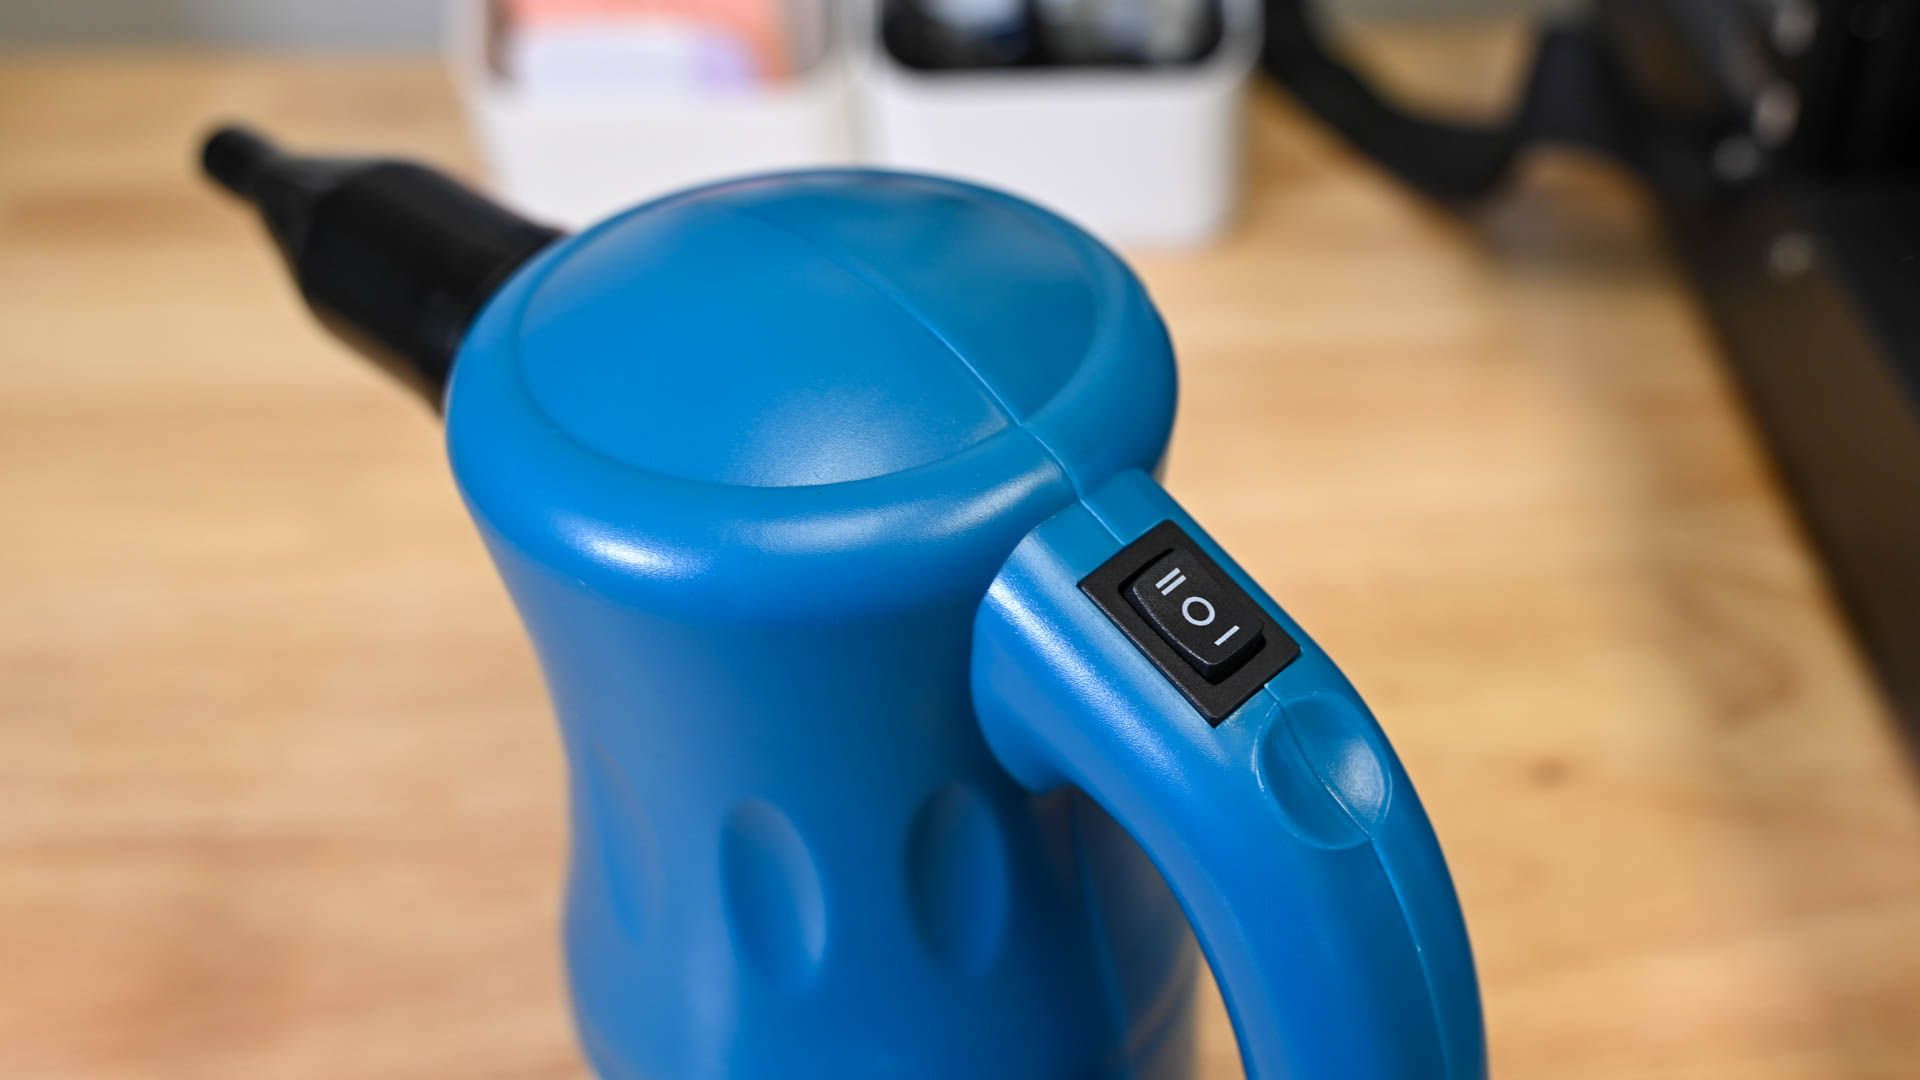 The power switch on the XPOWER Electric Air Duster